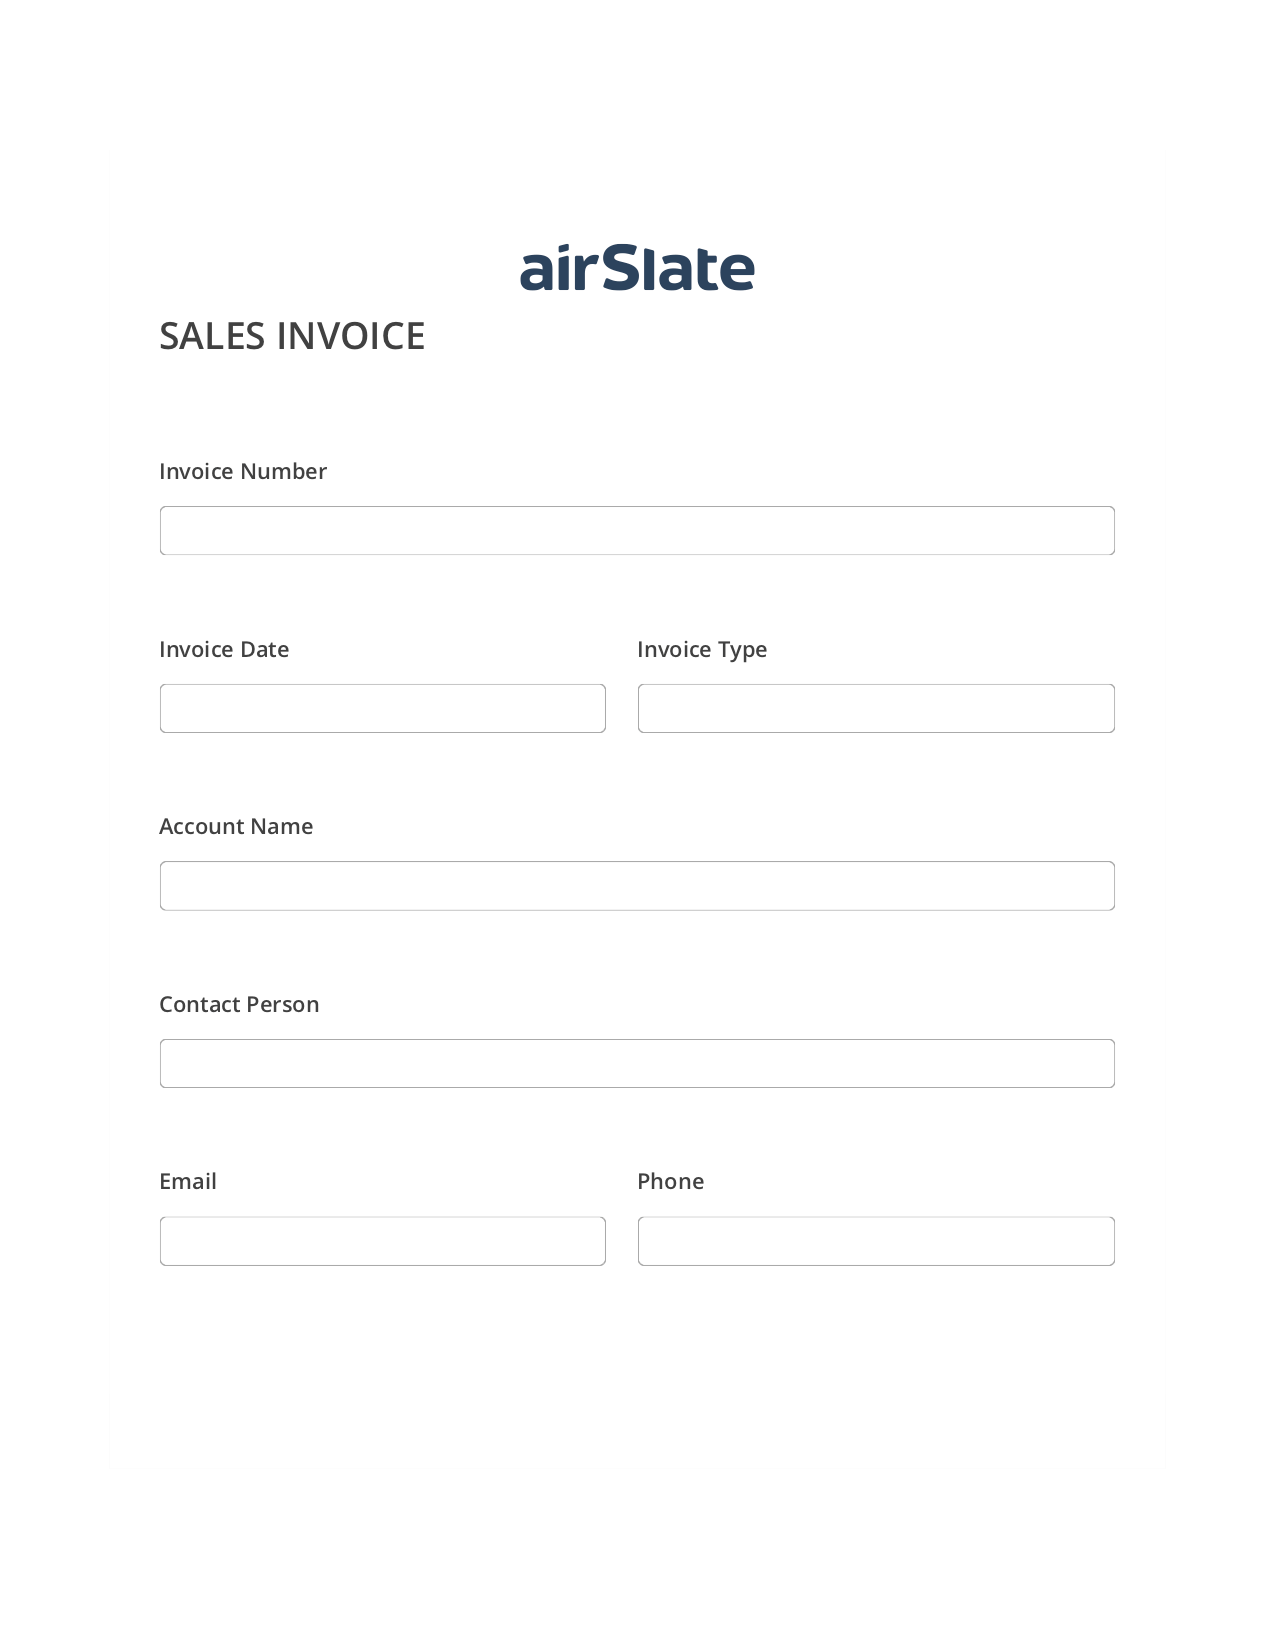 Sales Invoice Flow Create Slate from another Flow Bot